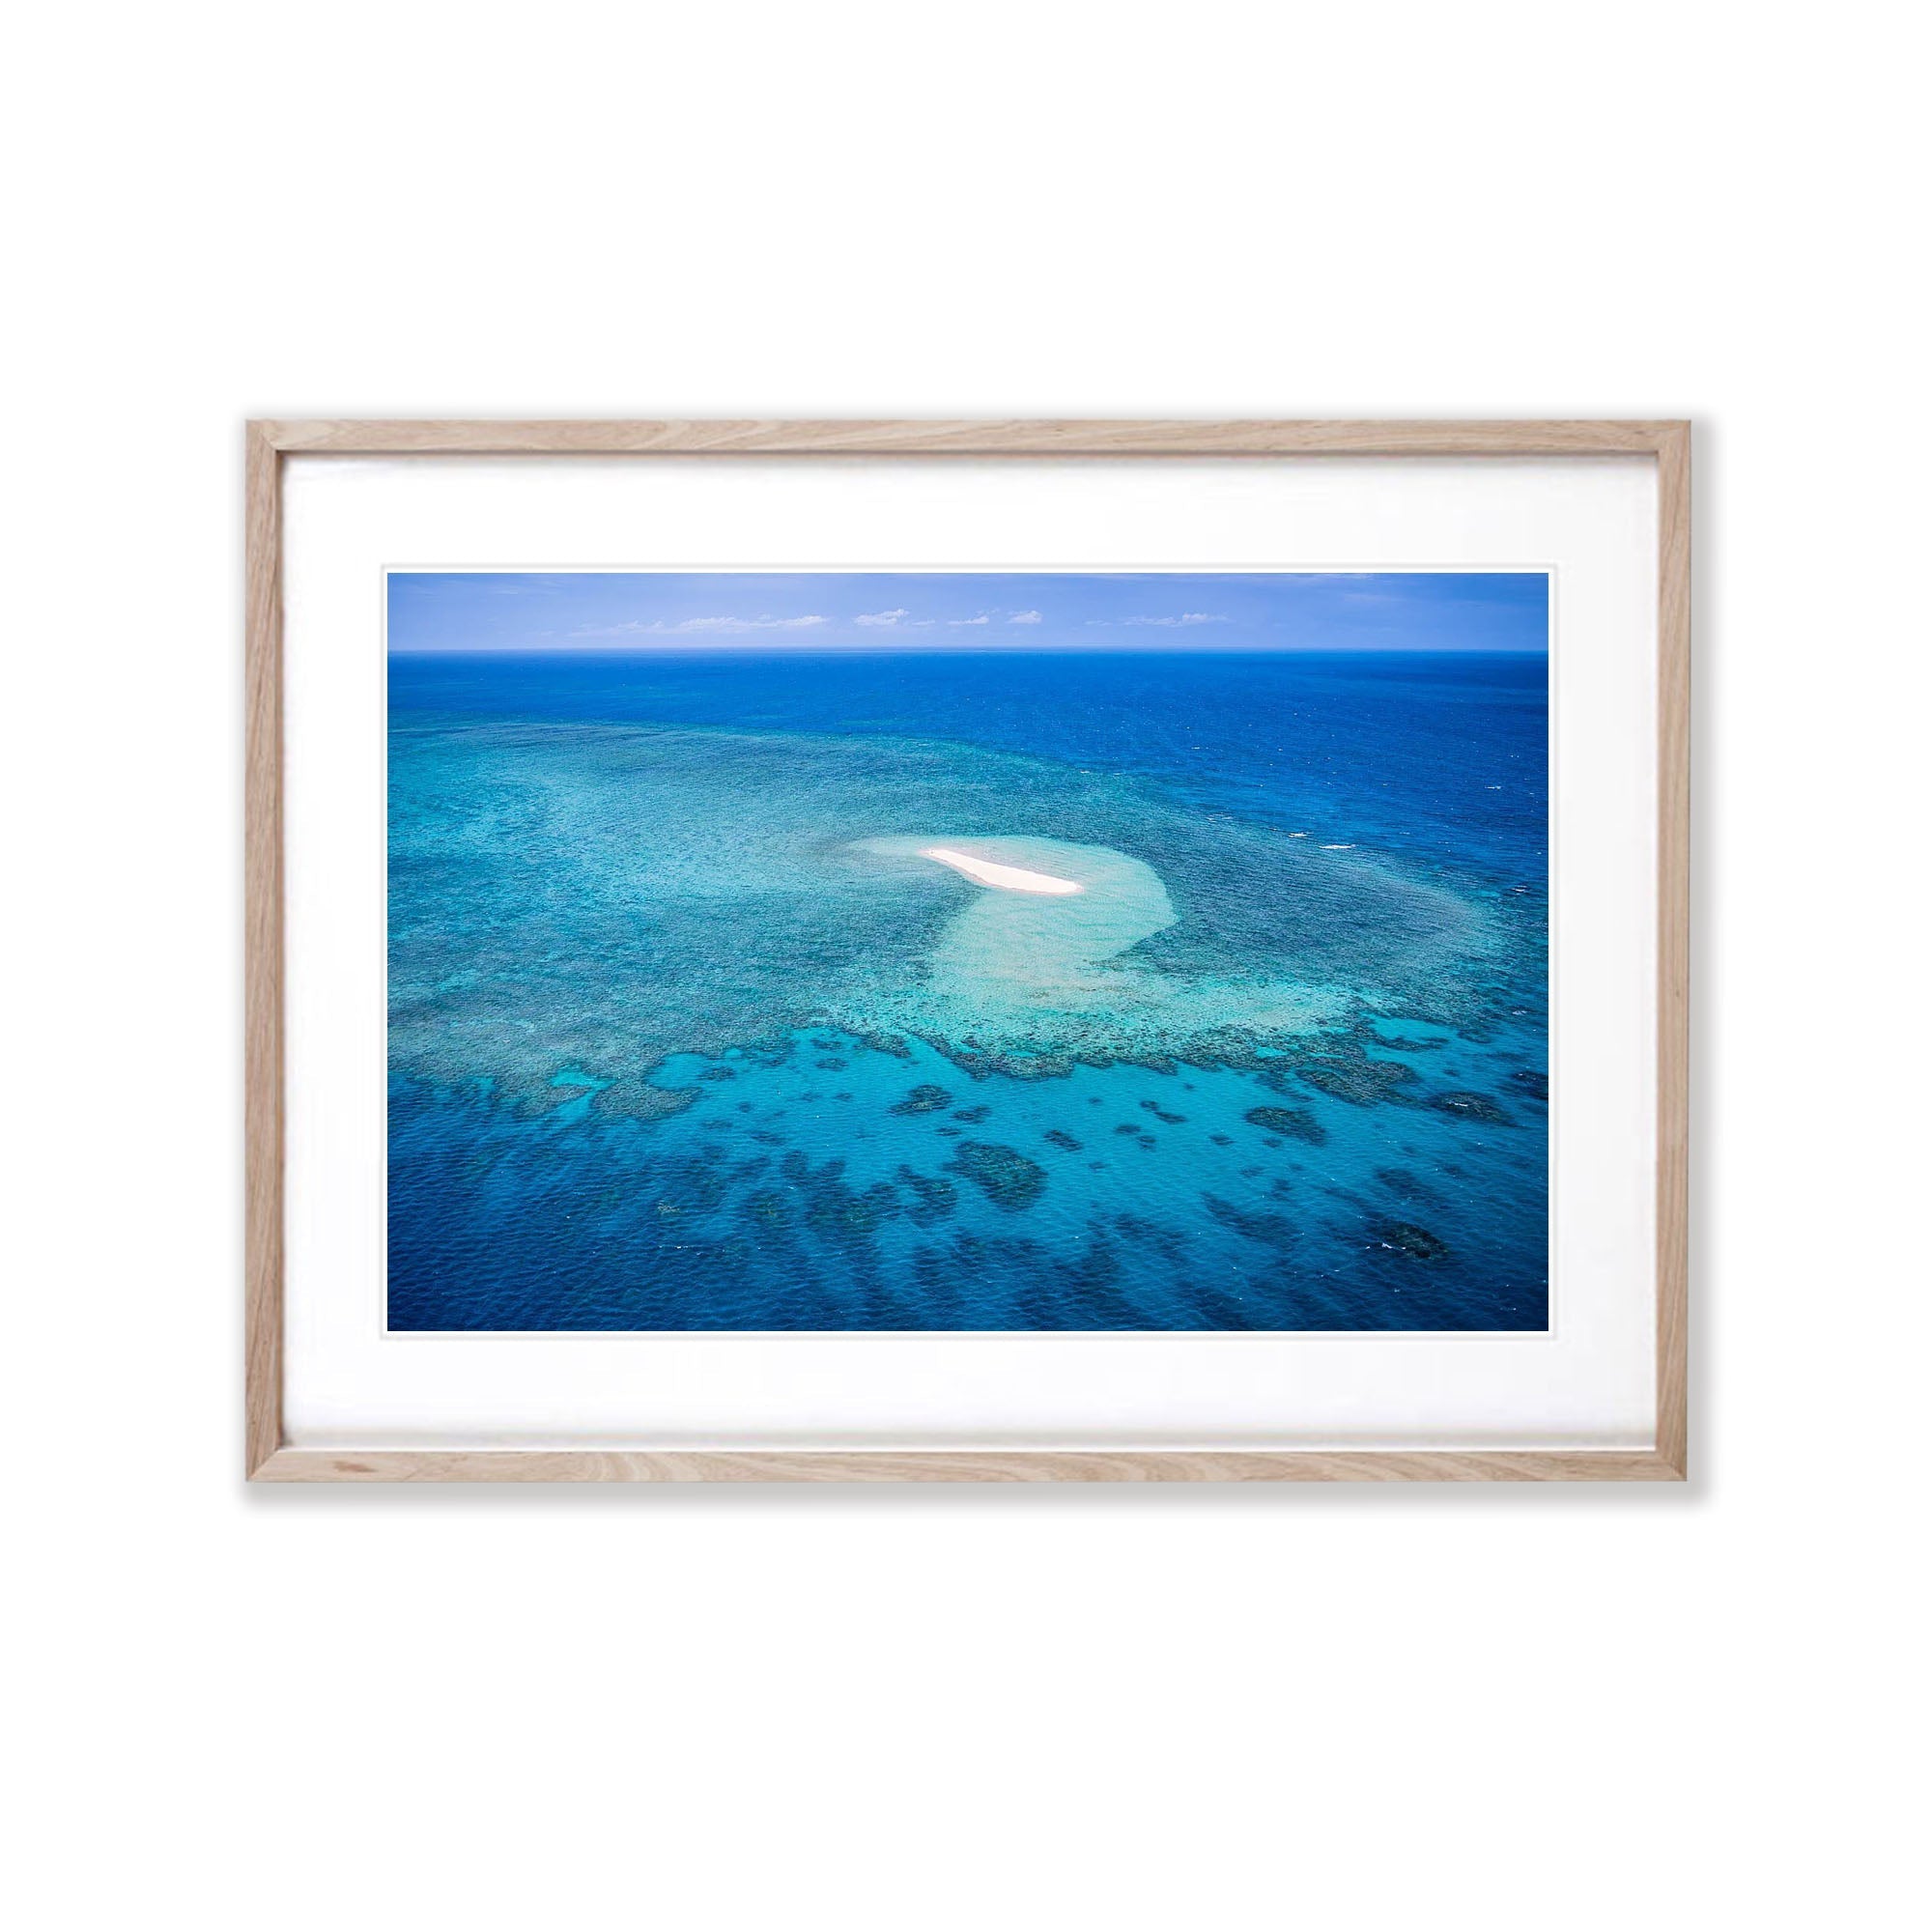 Remote Sandy Cay on the Great Barrier Reef, Far North Queensland